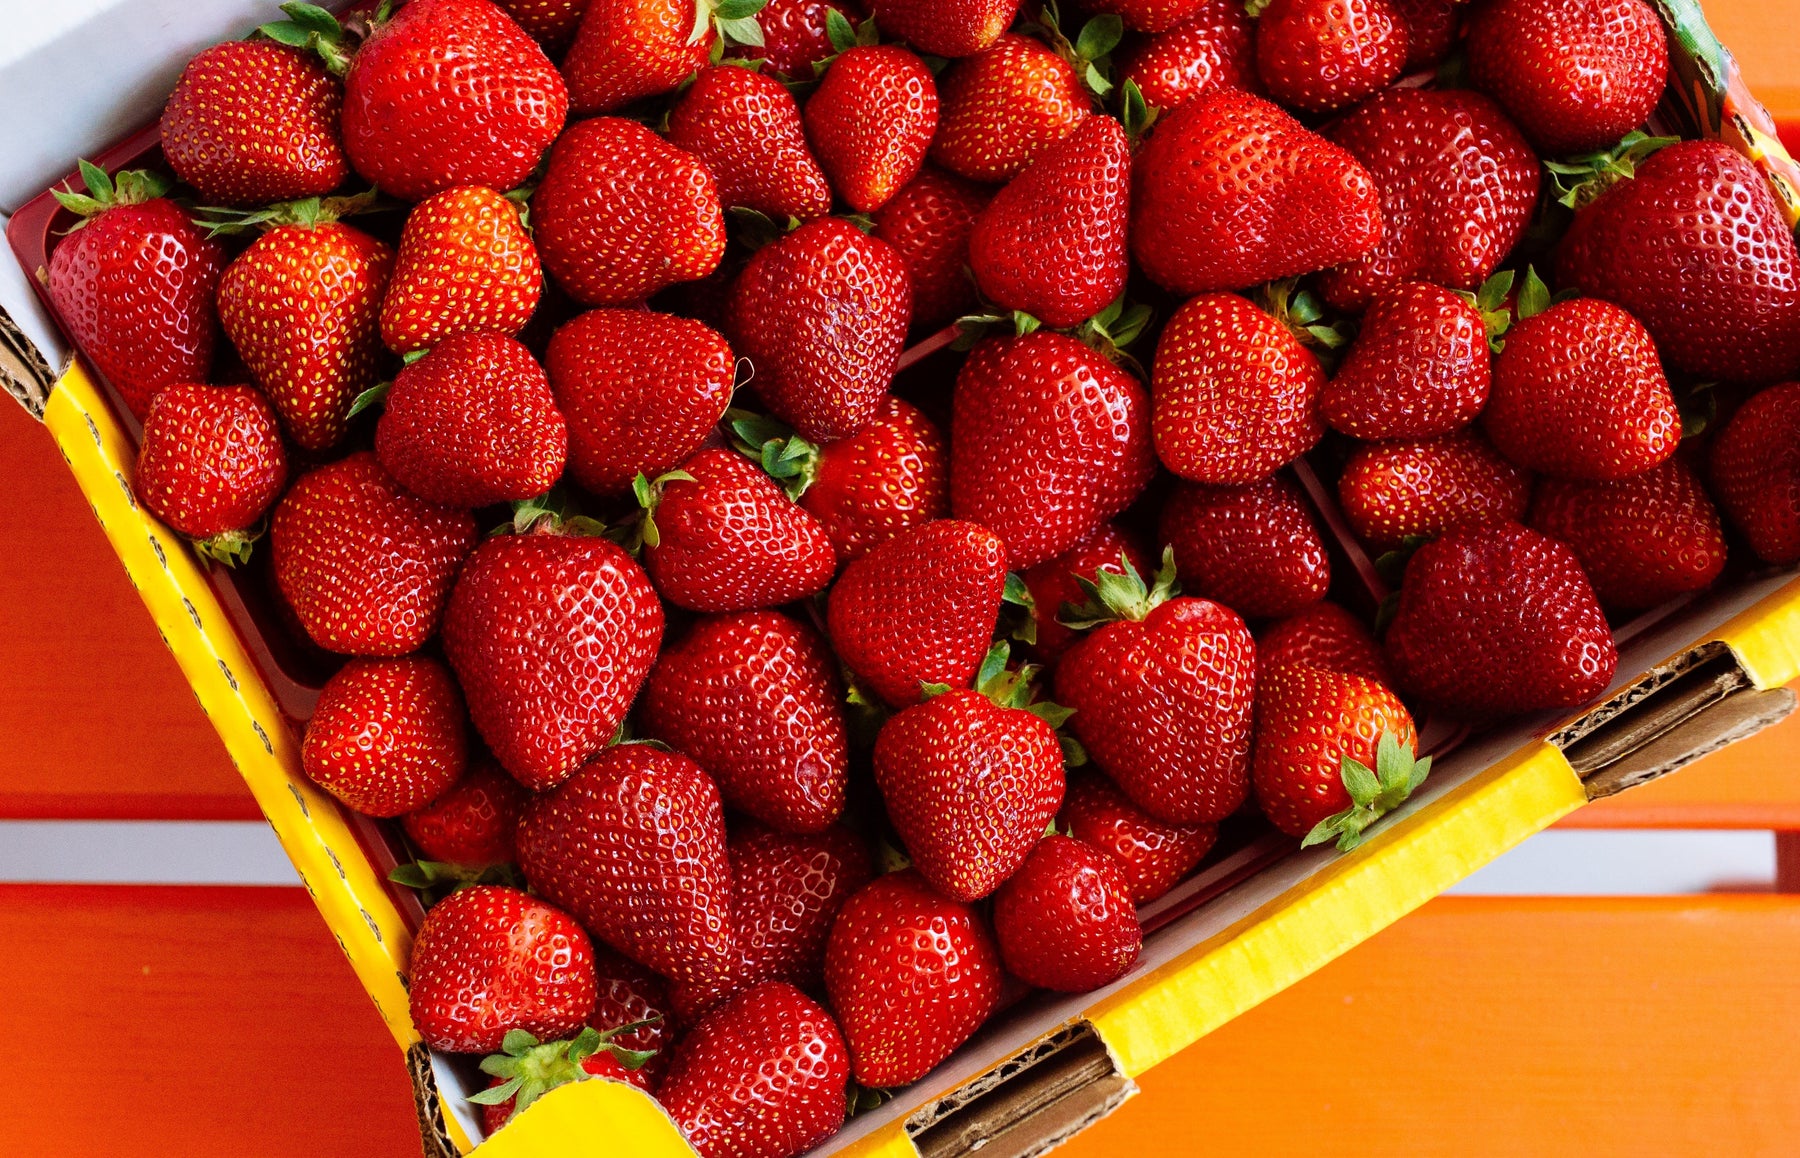 Korean Strawberry Varieties You Have to Try